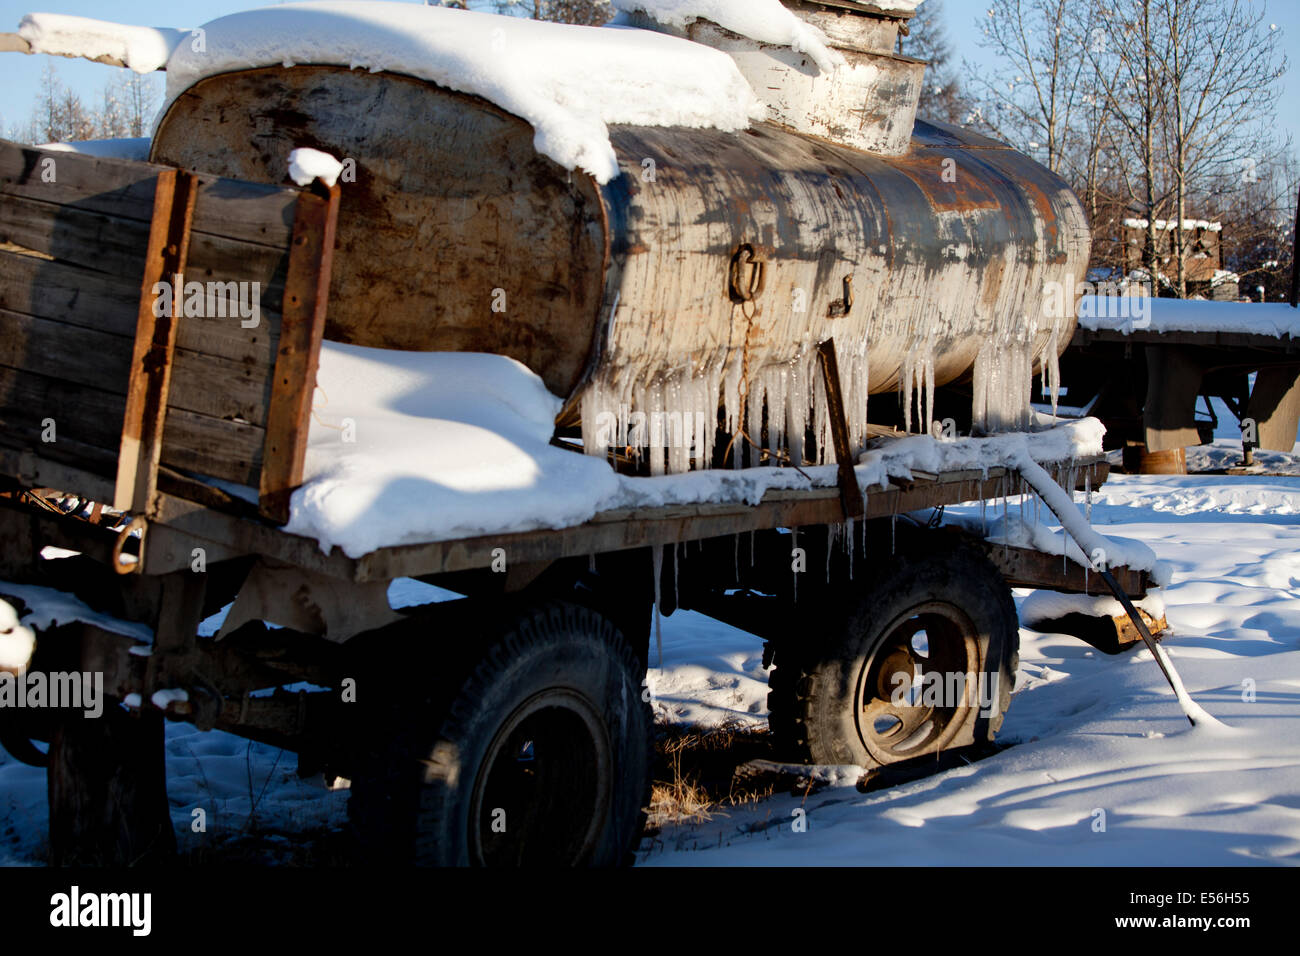 Frozen truck with icicles in snow farm machinery Stock Photo